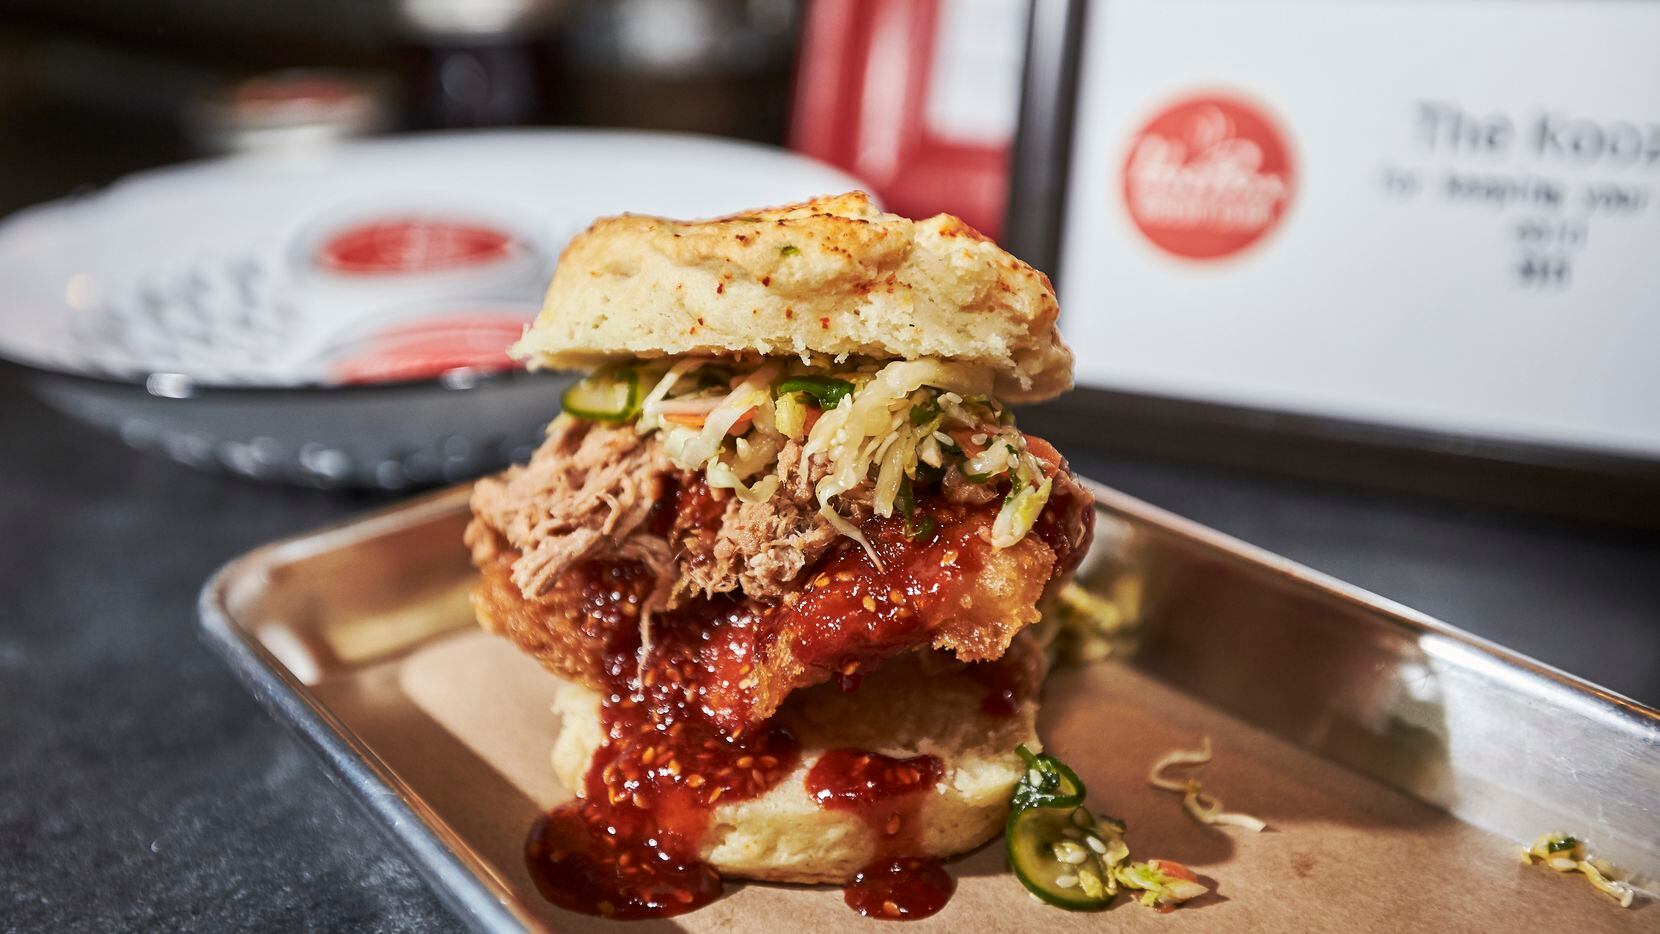 "Hot Box in Tokyo," asian fried chicken, gochujang glaze, pulled pork and asian slaw, during...